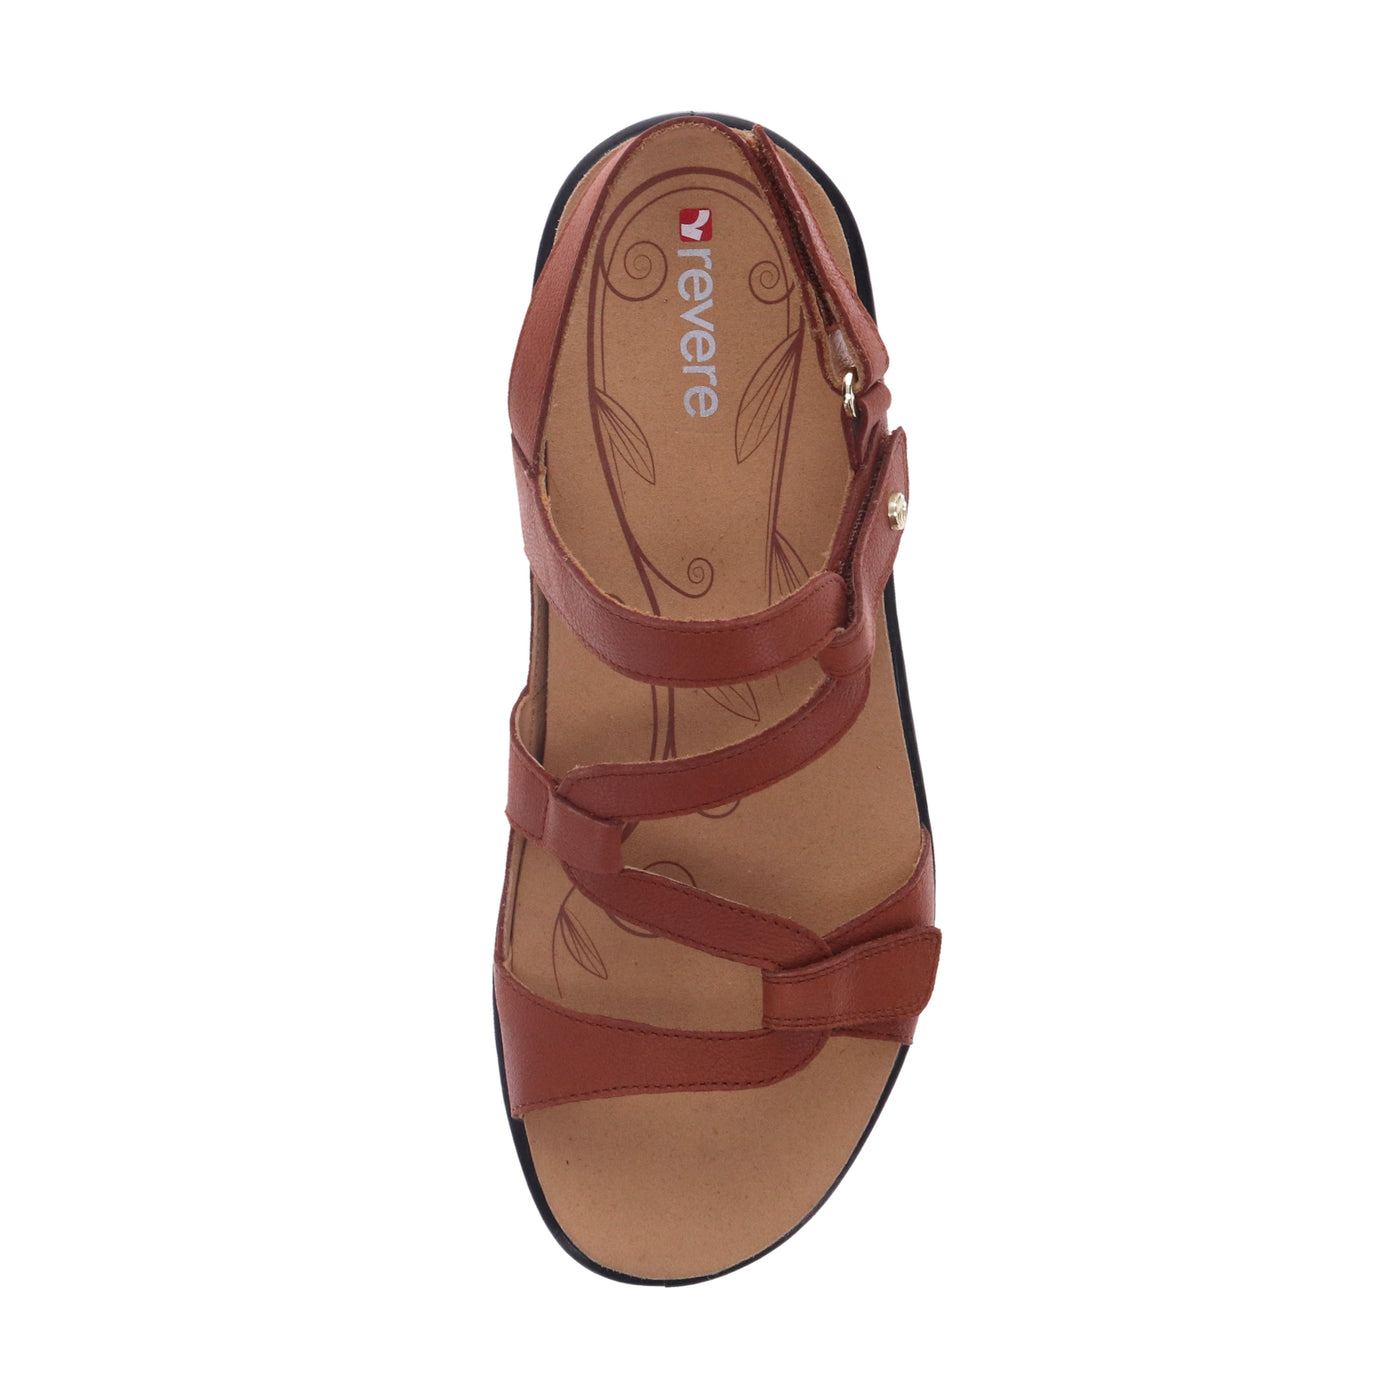 Orthotic sandal Tan by Revere shoes